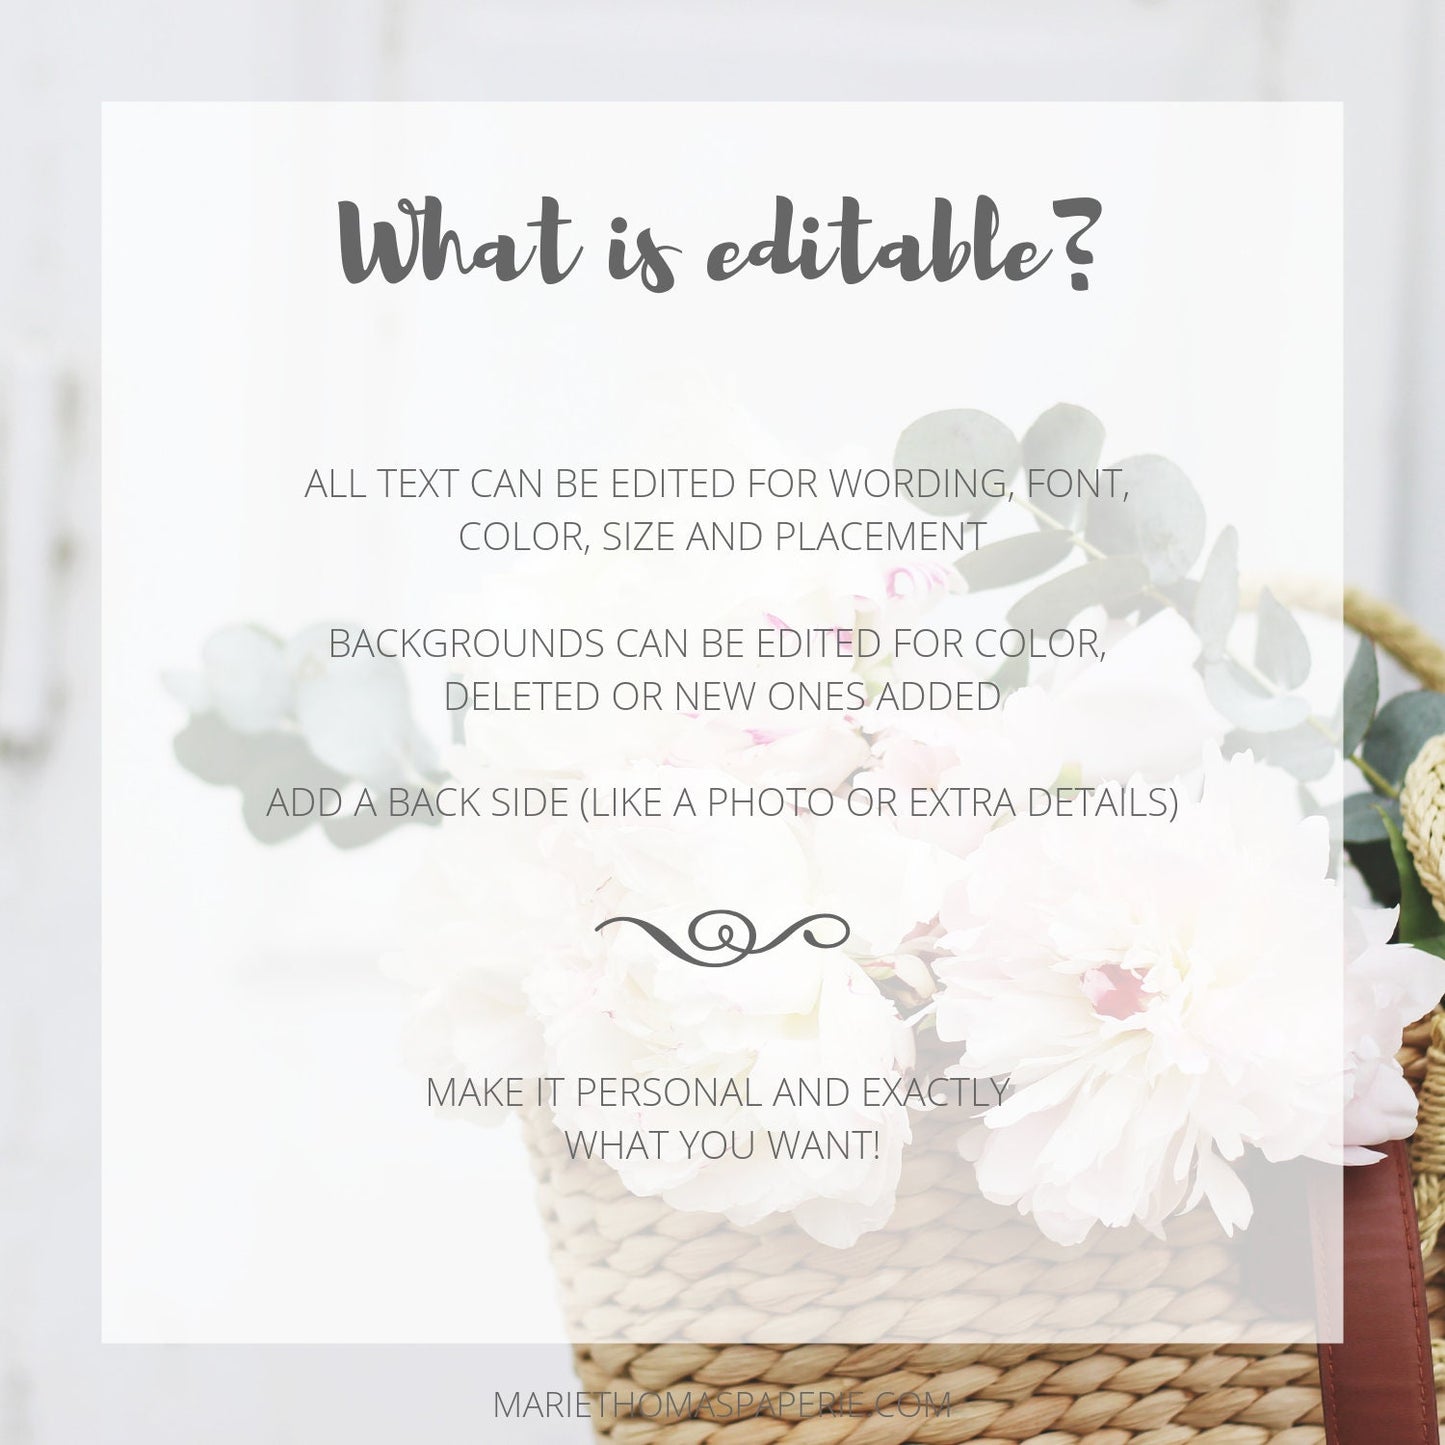 Editable How Old Was the Bride Bridal Shower Games Wedding Games Bridal Game Greenery Template